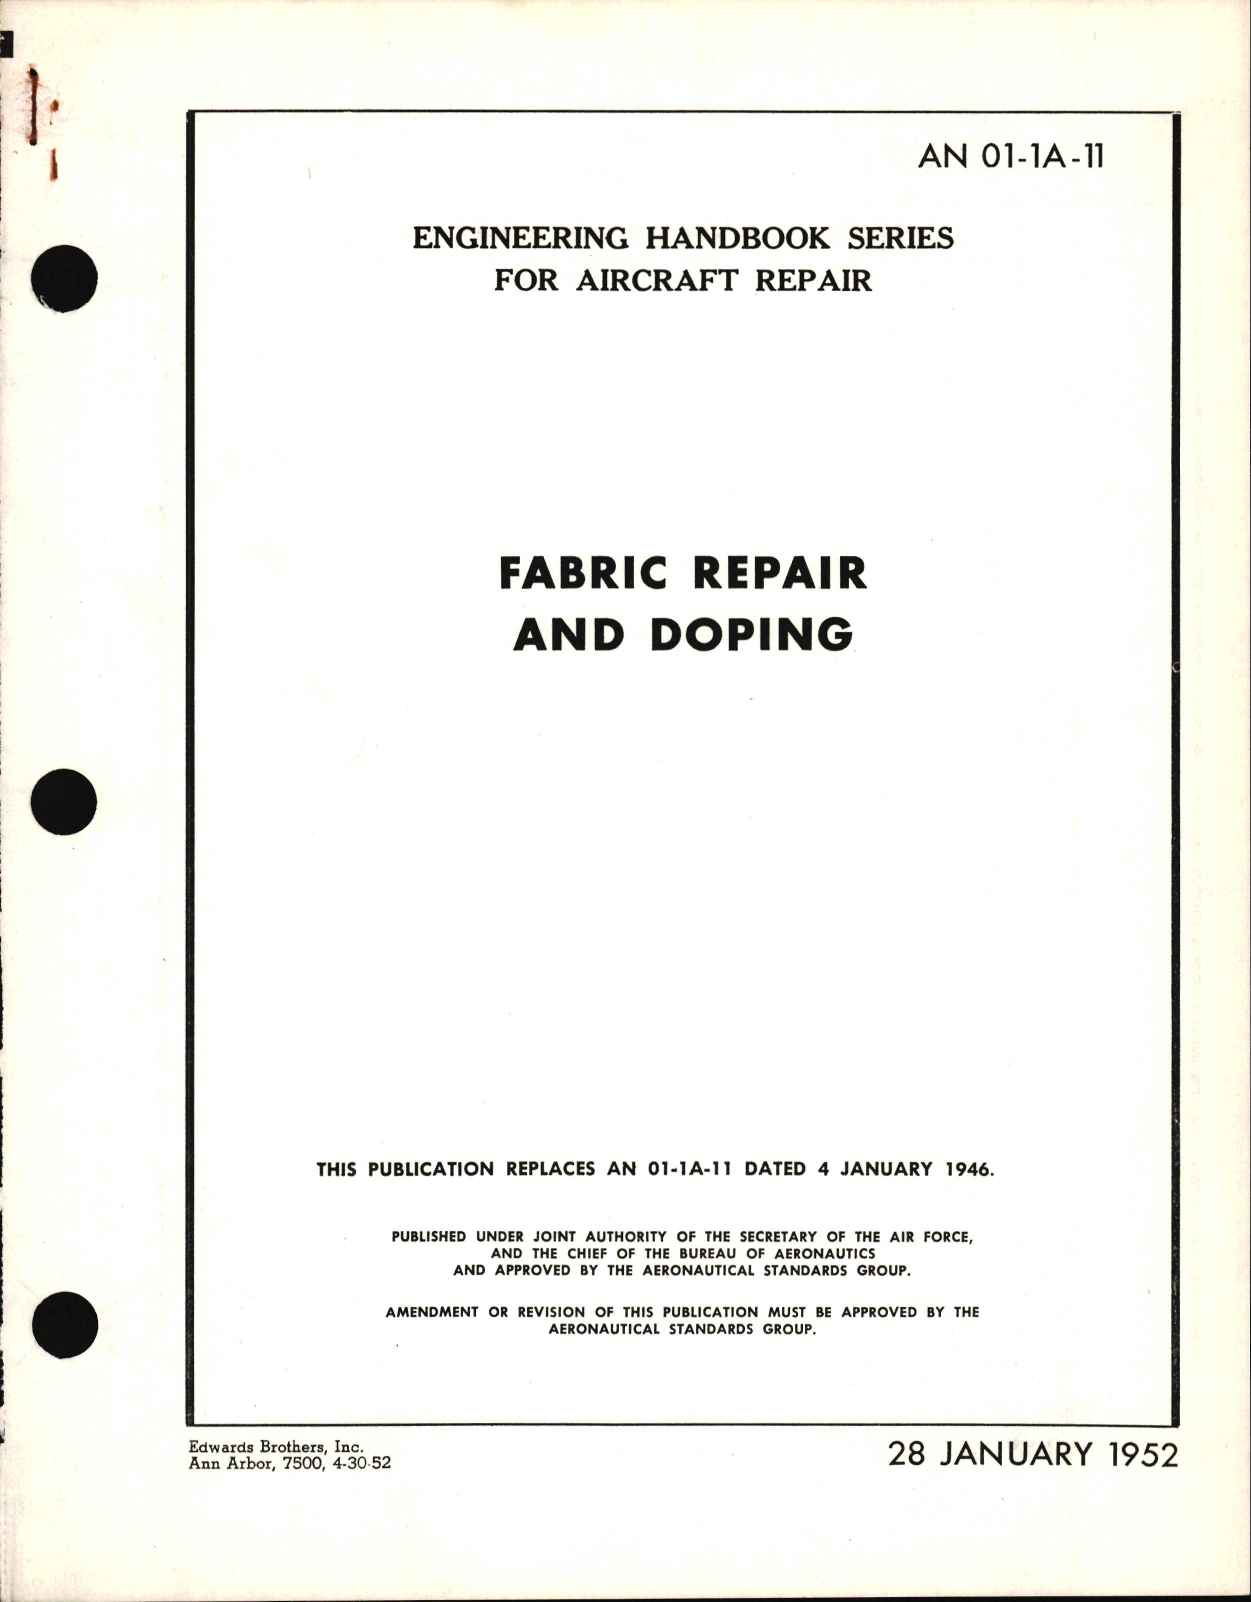 Sample page 1 from AirCorps Library document: Fabric Repair and Doping